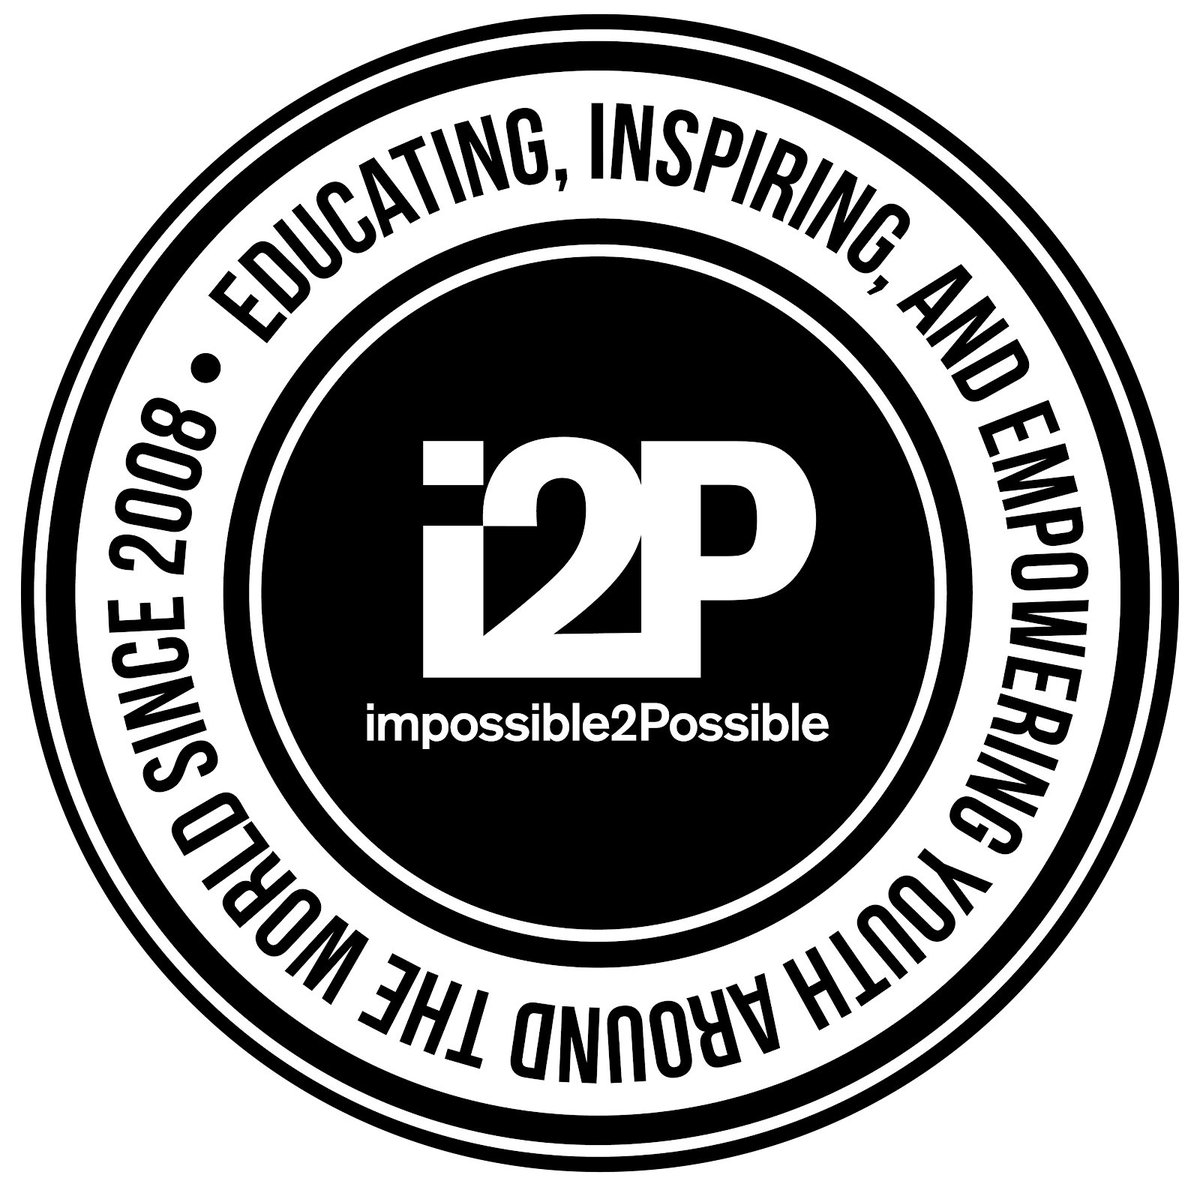 I am so excited to be back out in the field in two weeks with @RayZahab and impossible 2 Possible @GOi2P to teach youth ambassadors about WEATHER ☀️🌧️⛈️🌪️and CLIMATE 🌎 stay tuned for more details! @weathernetwork @PelmorexCorp